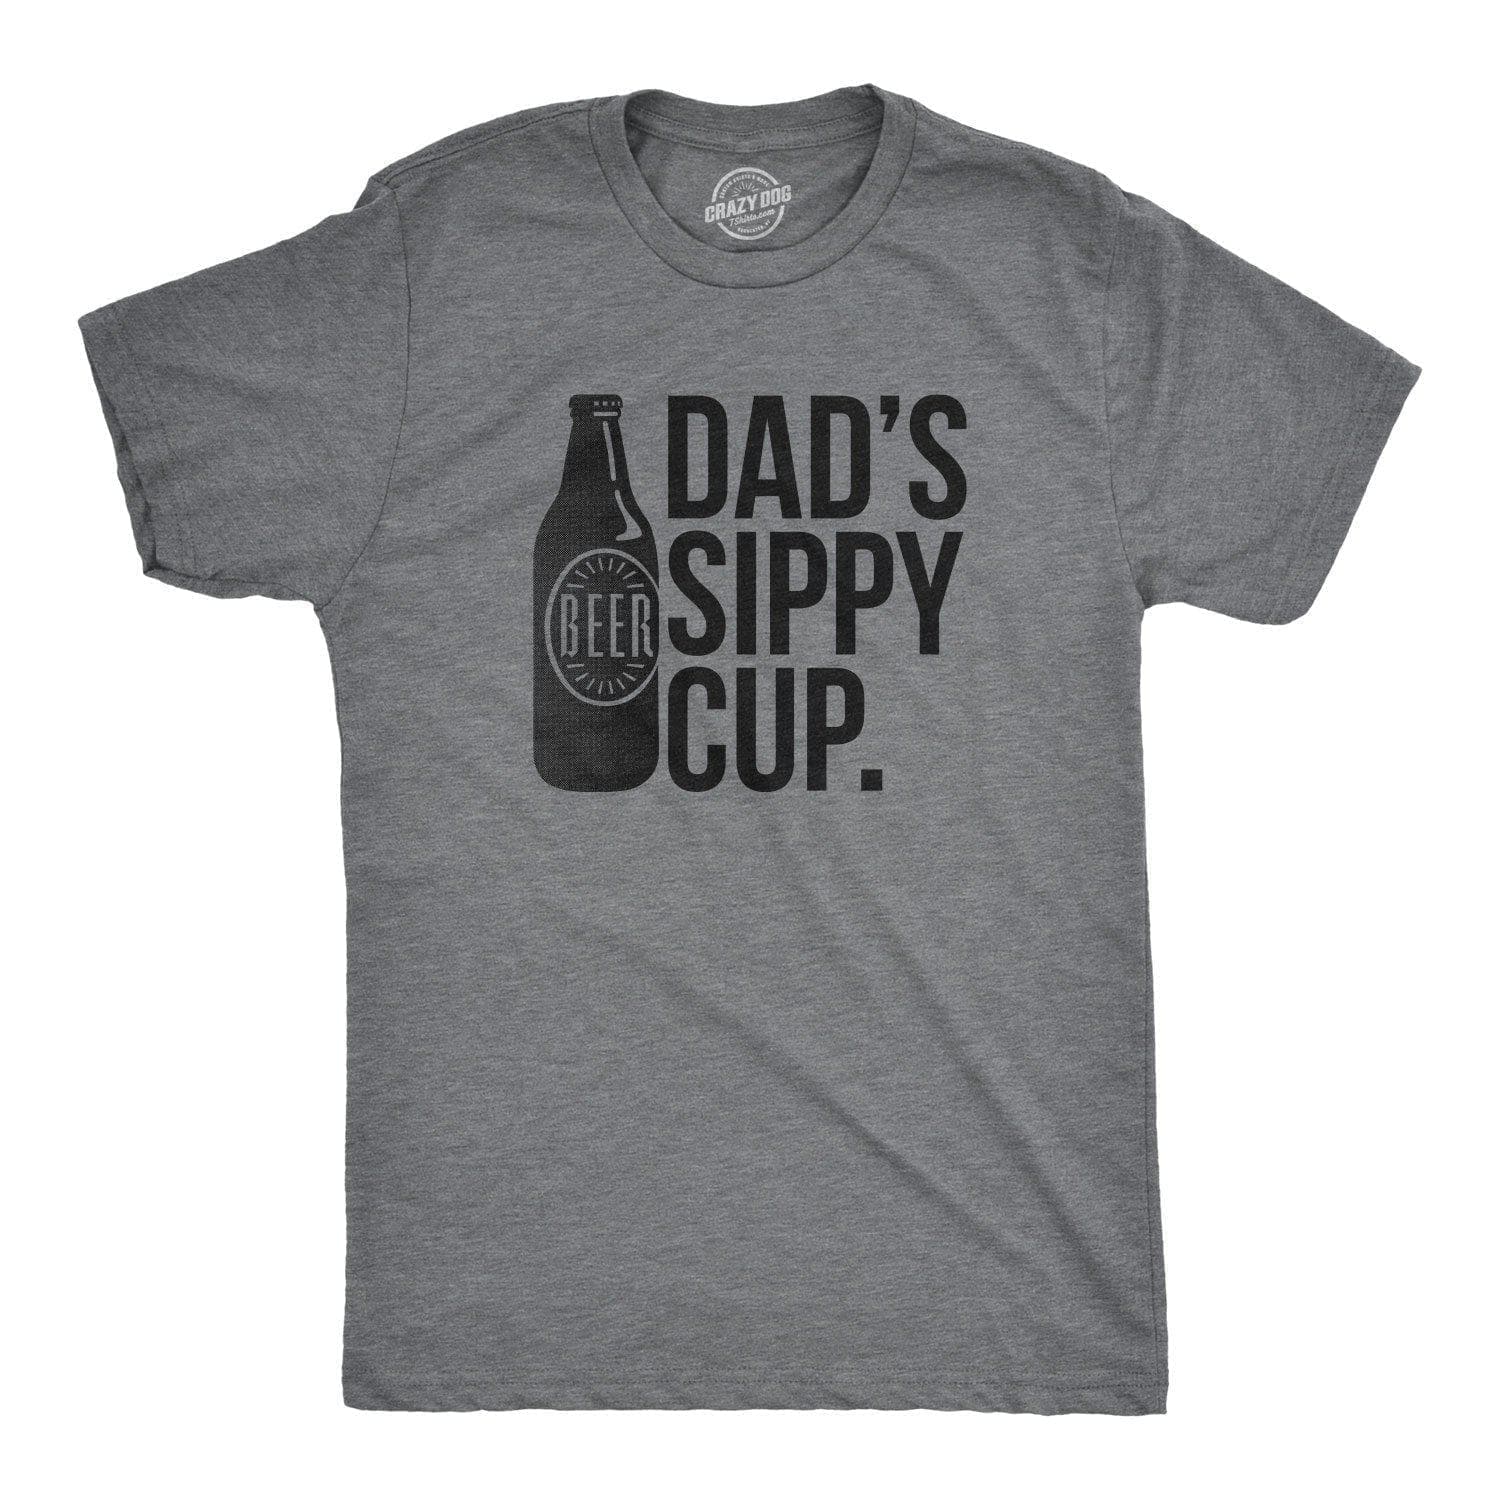 Dad's Sippy Cup Men's Tshirt - Crazy Dog T-Shirts